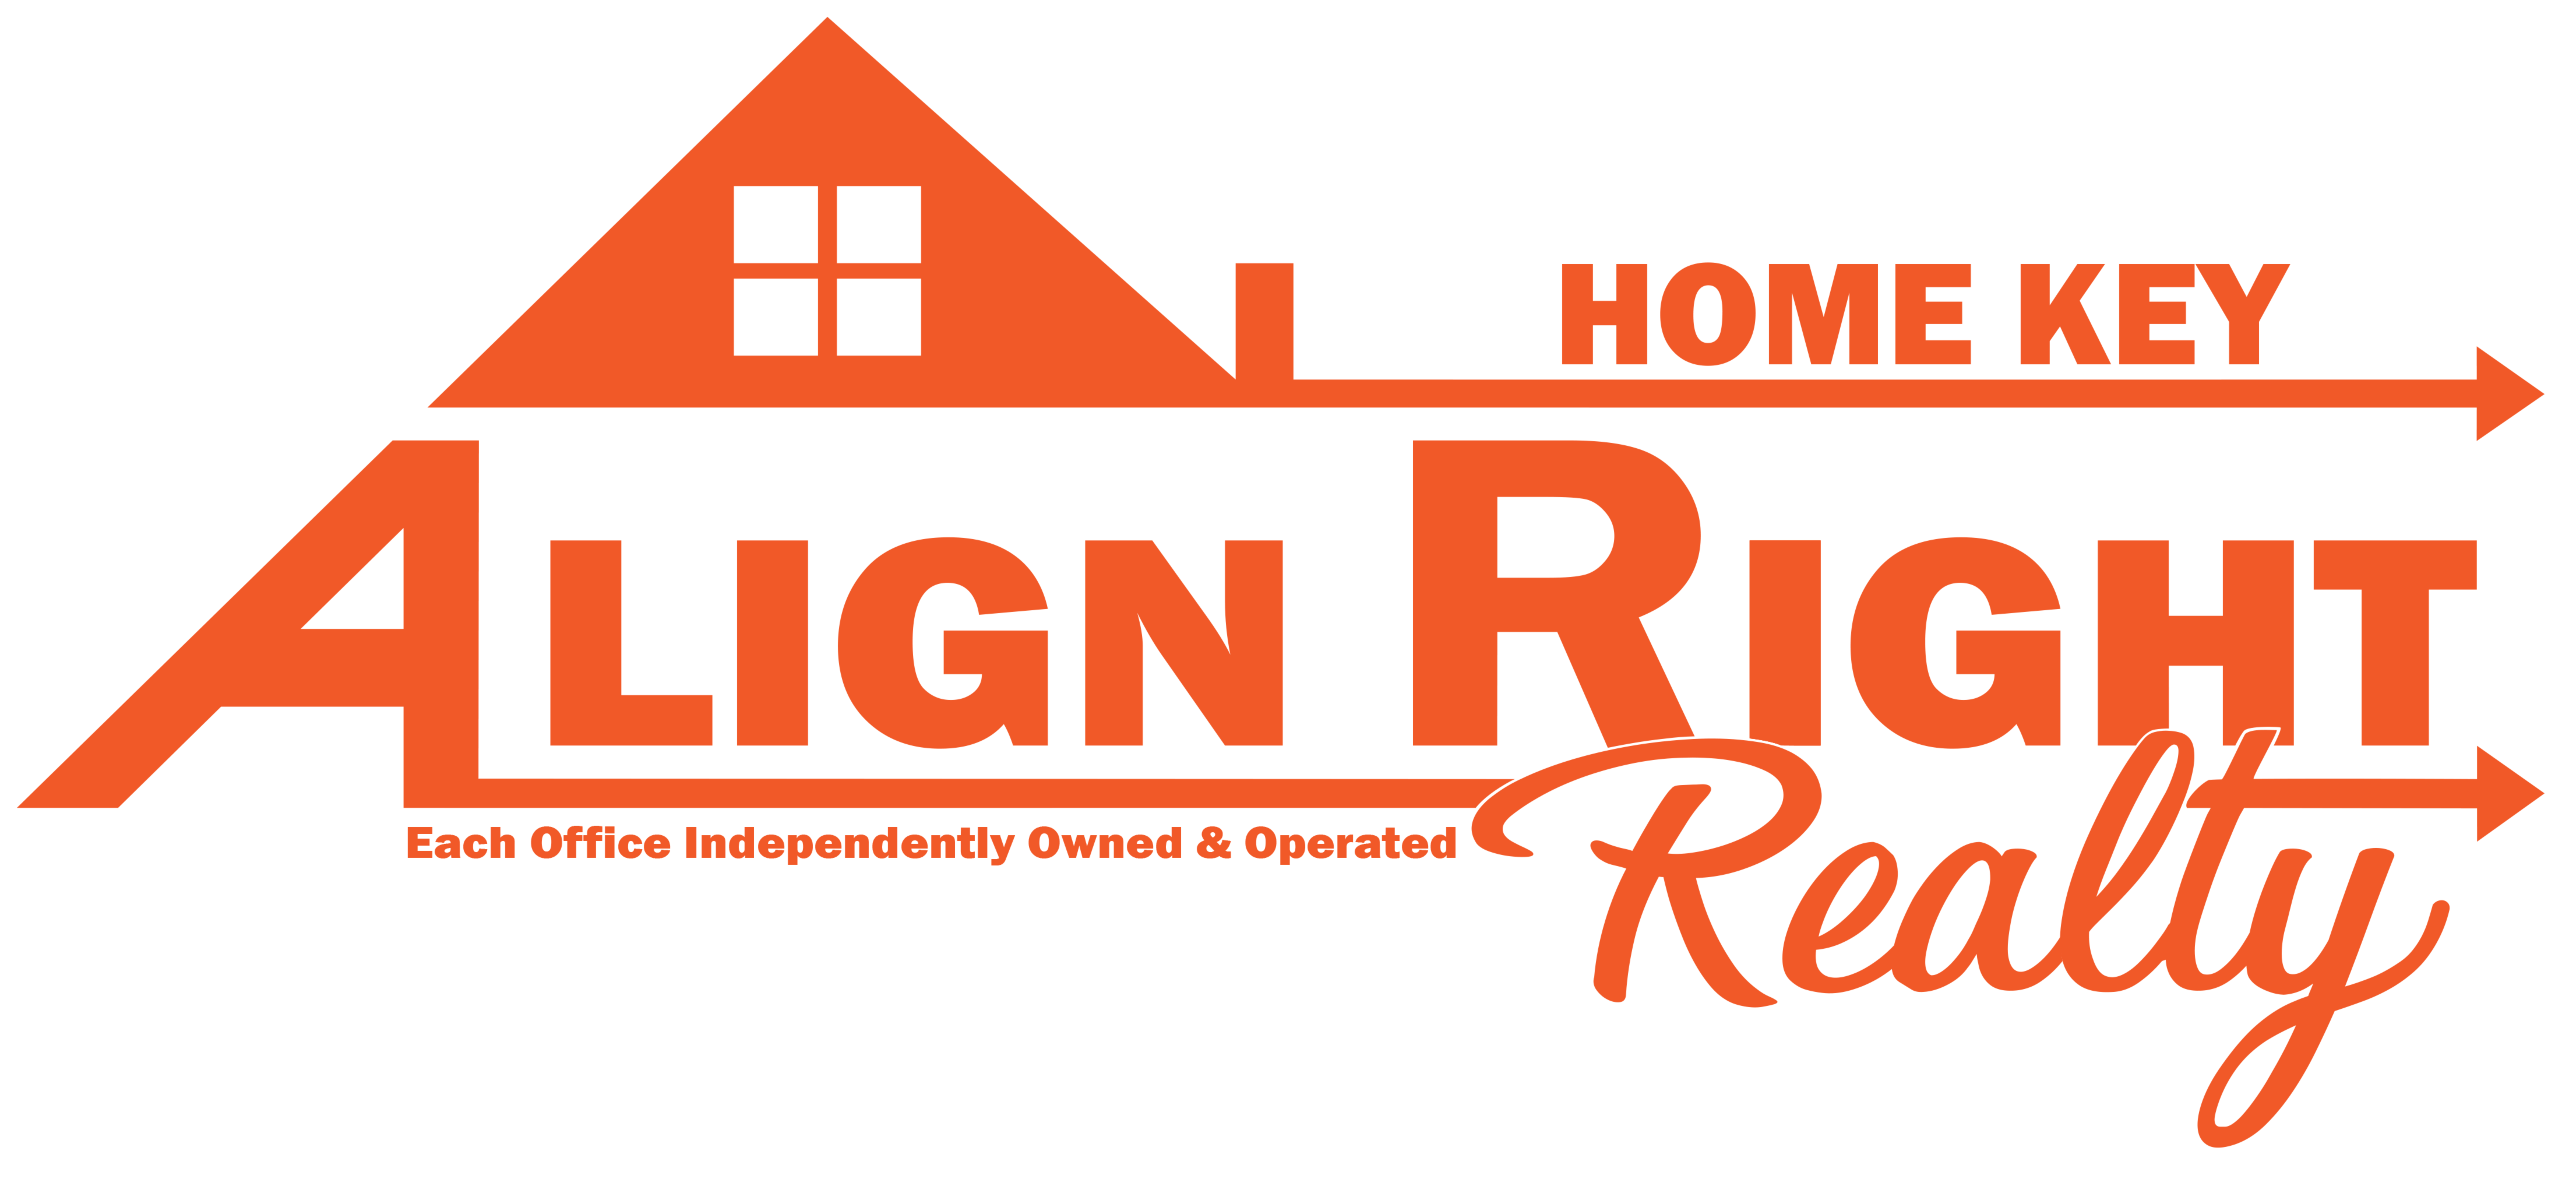 Align Right Realty Home Key